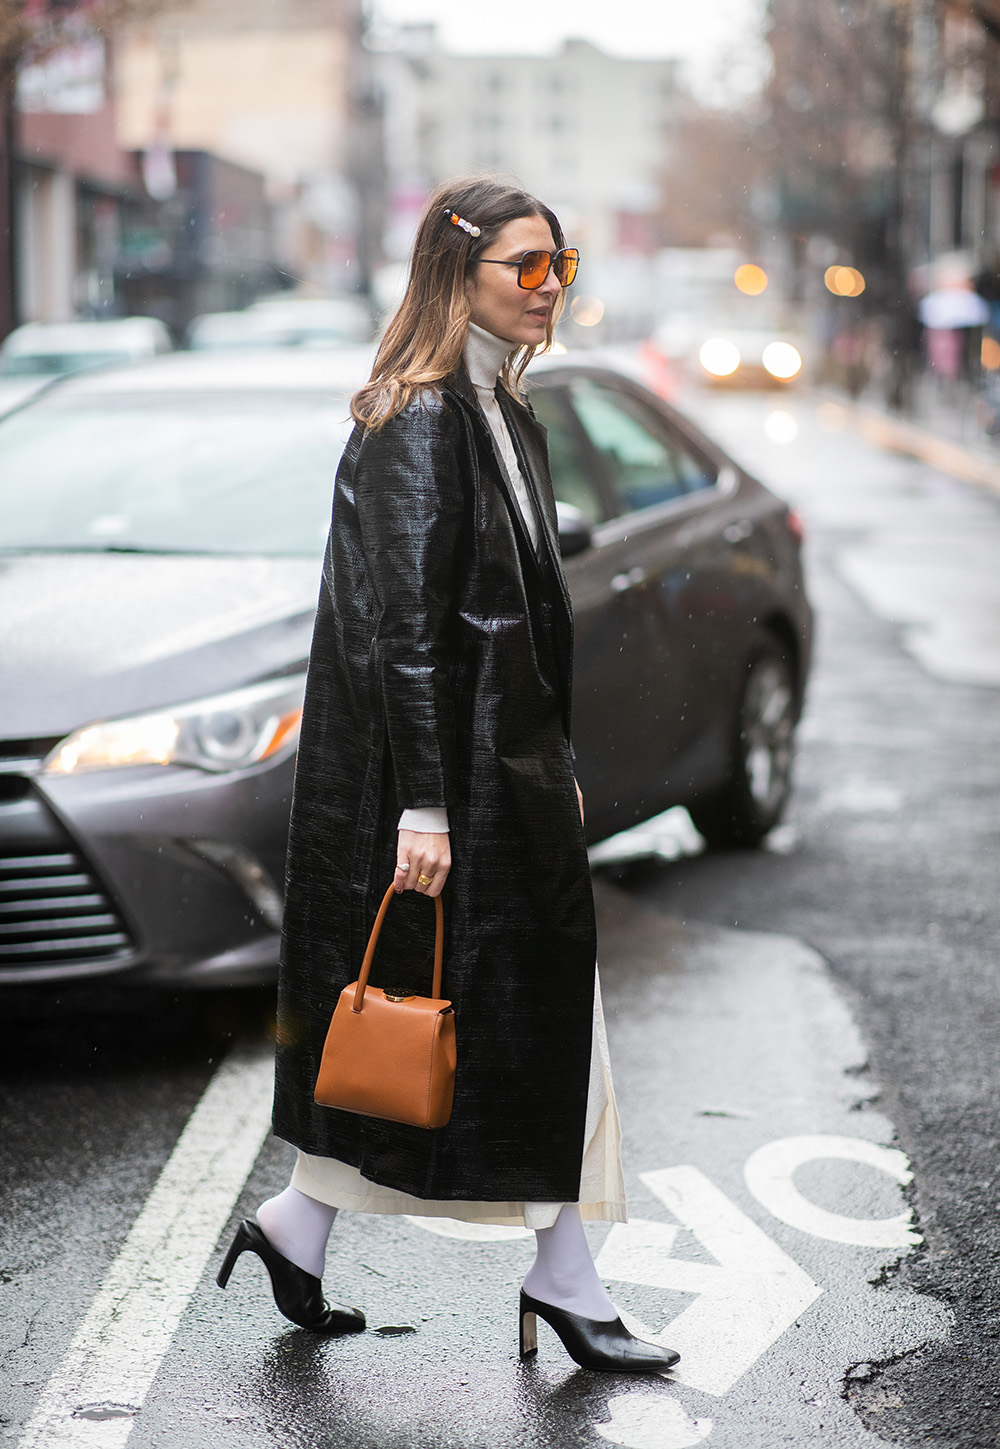 NEW YORK, NEW YORK - FEBRUARY 08: A guest is seen wearing black coat, turtleneck, brown bag, hair clip outside Nanushka during New York Fashion Week Autumn Winter 2019 on February 08, 2019 in New York City. (Photo by Christian Vierig/Getty Images)